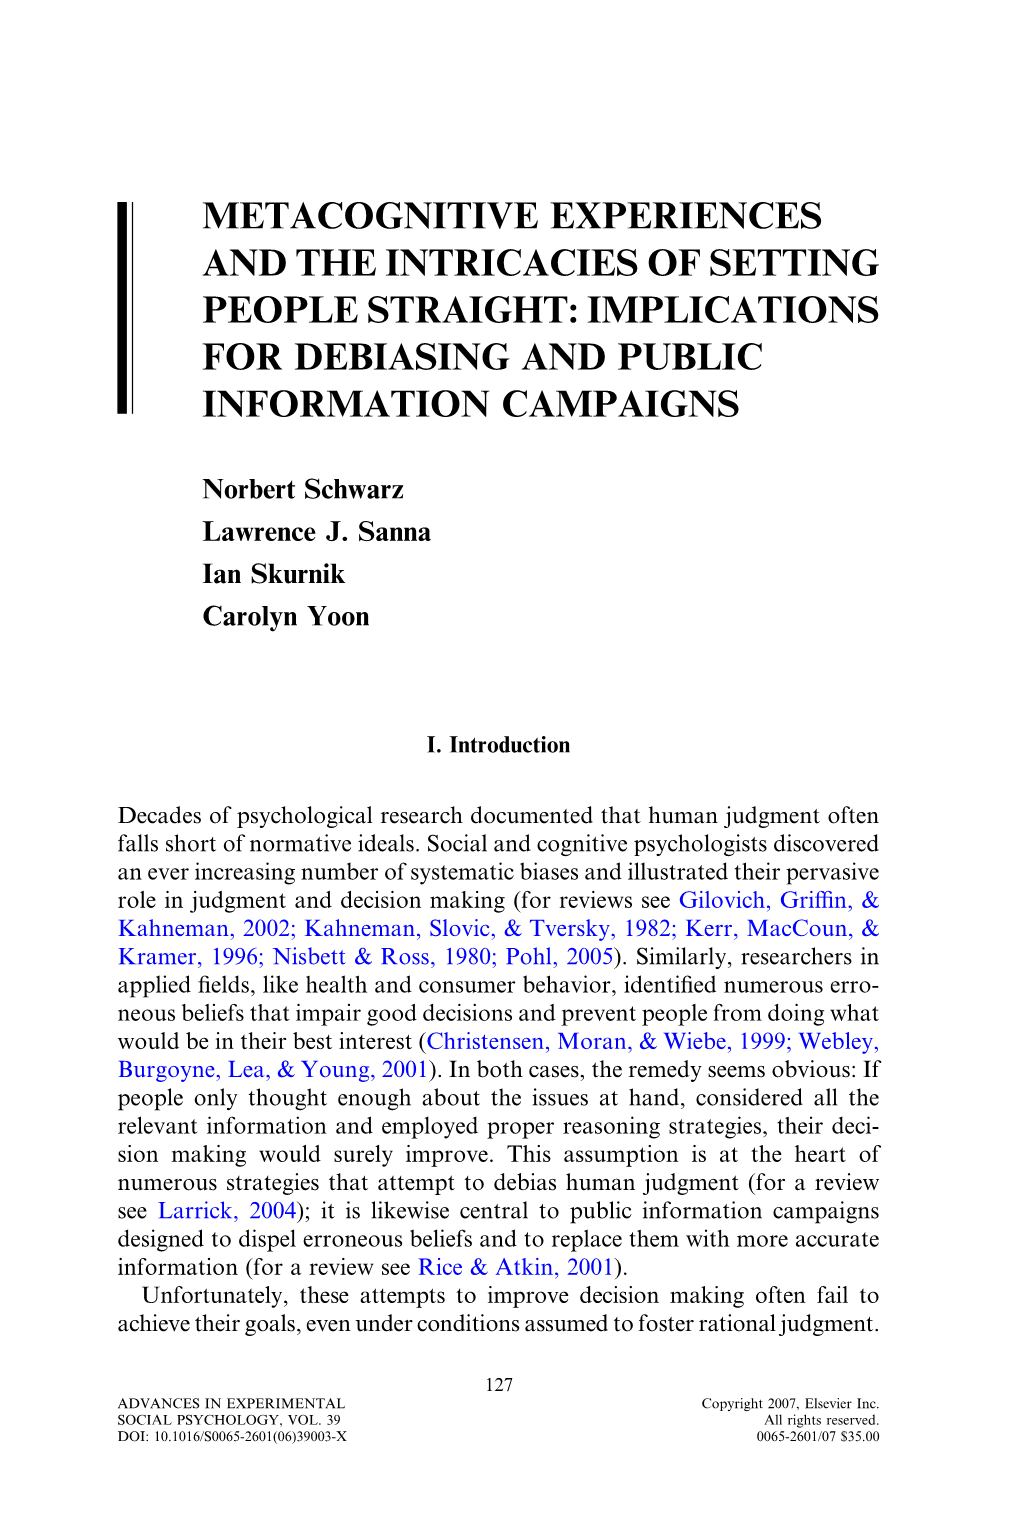 Metacognitive Experiences and the Intricacies of Setting People Straight: Implications for Debiasing and Public Information Campaigns